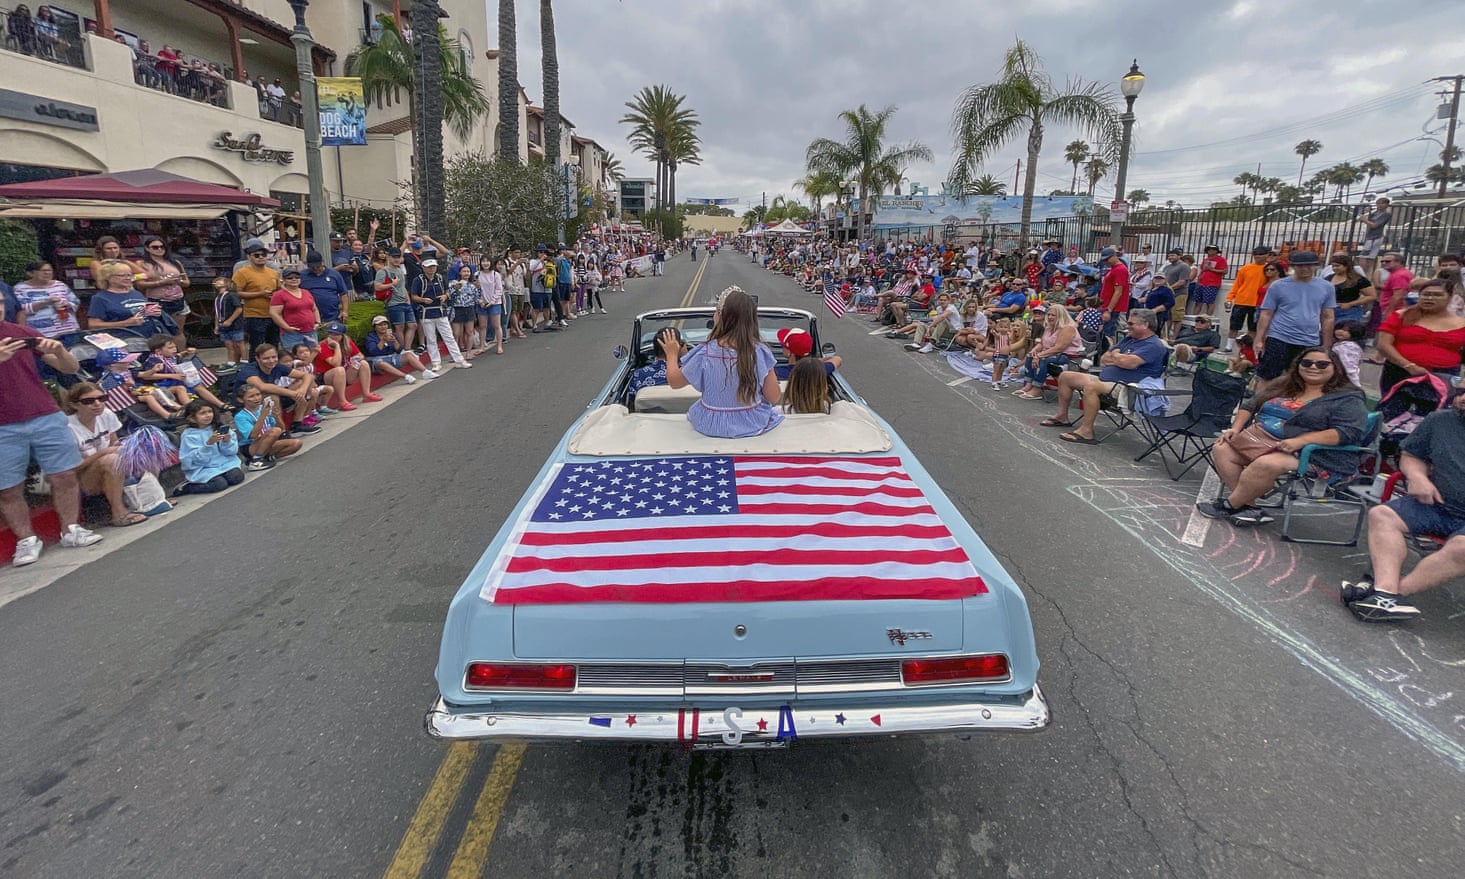 A long, older-model, powder-blue convertible with an American flag across the back half drives up a two-lane road crowded with people, with palm trees.